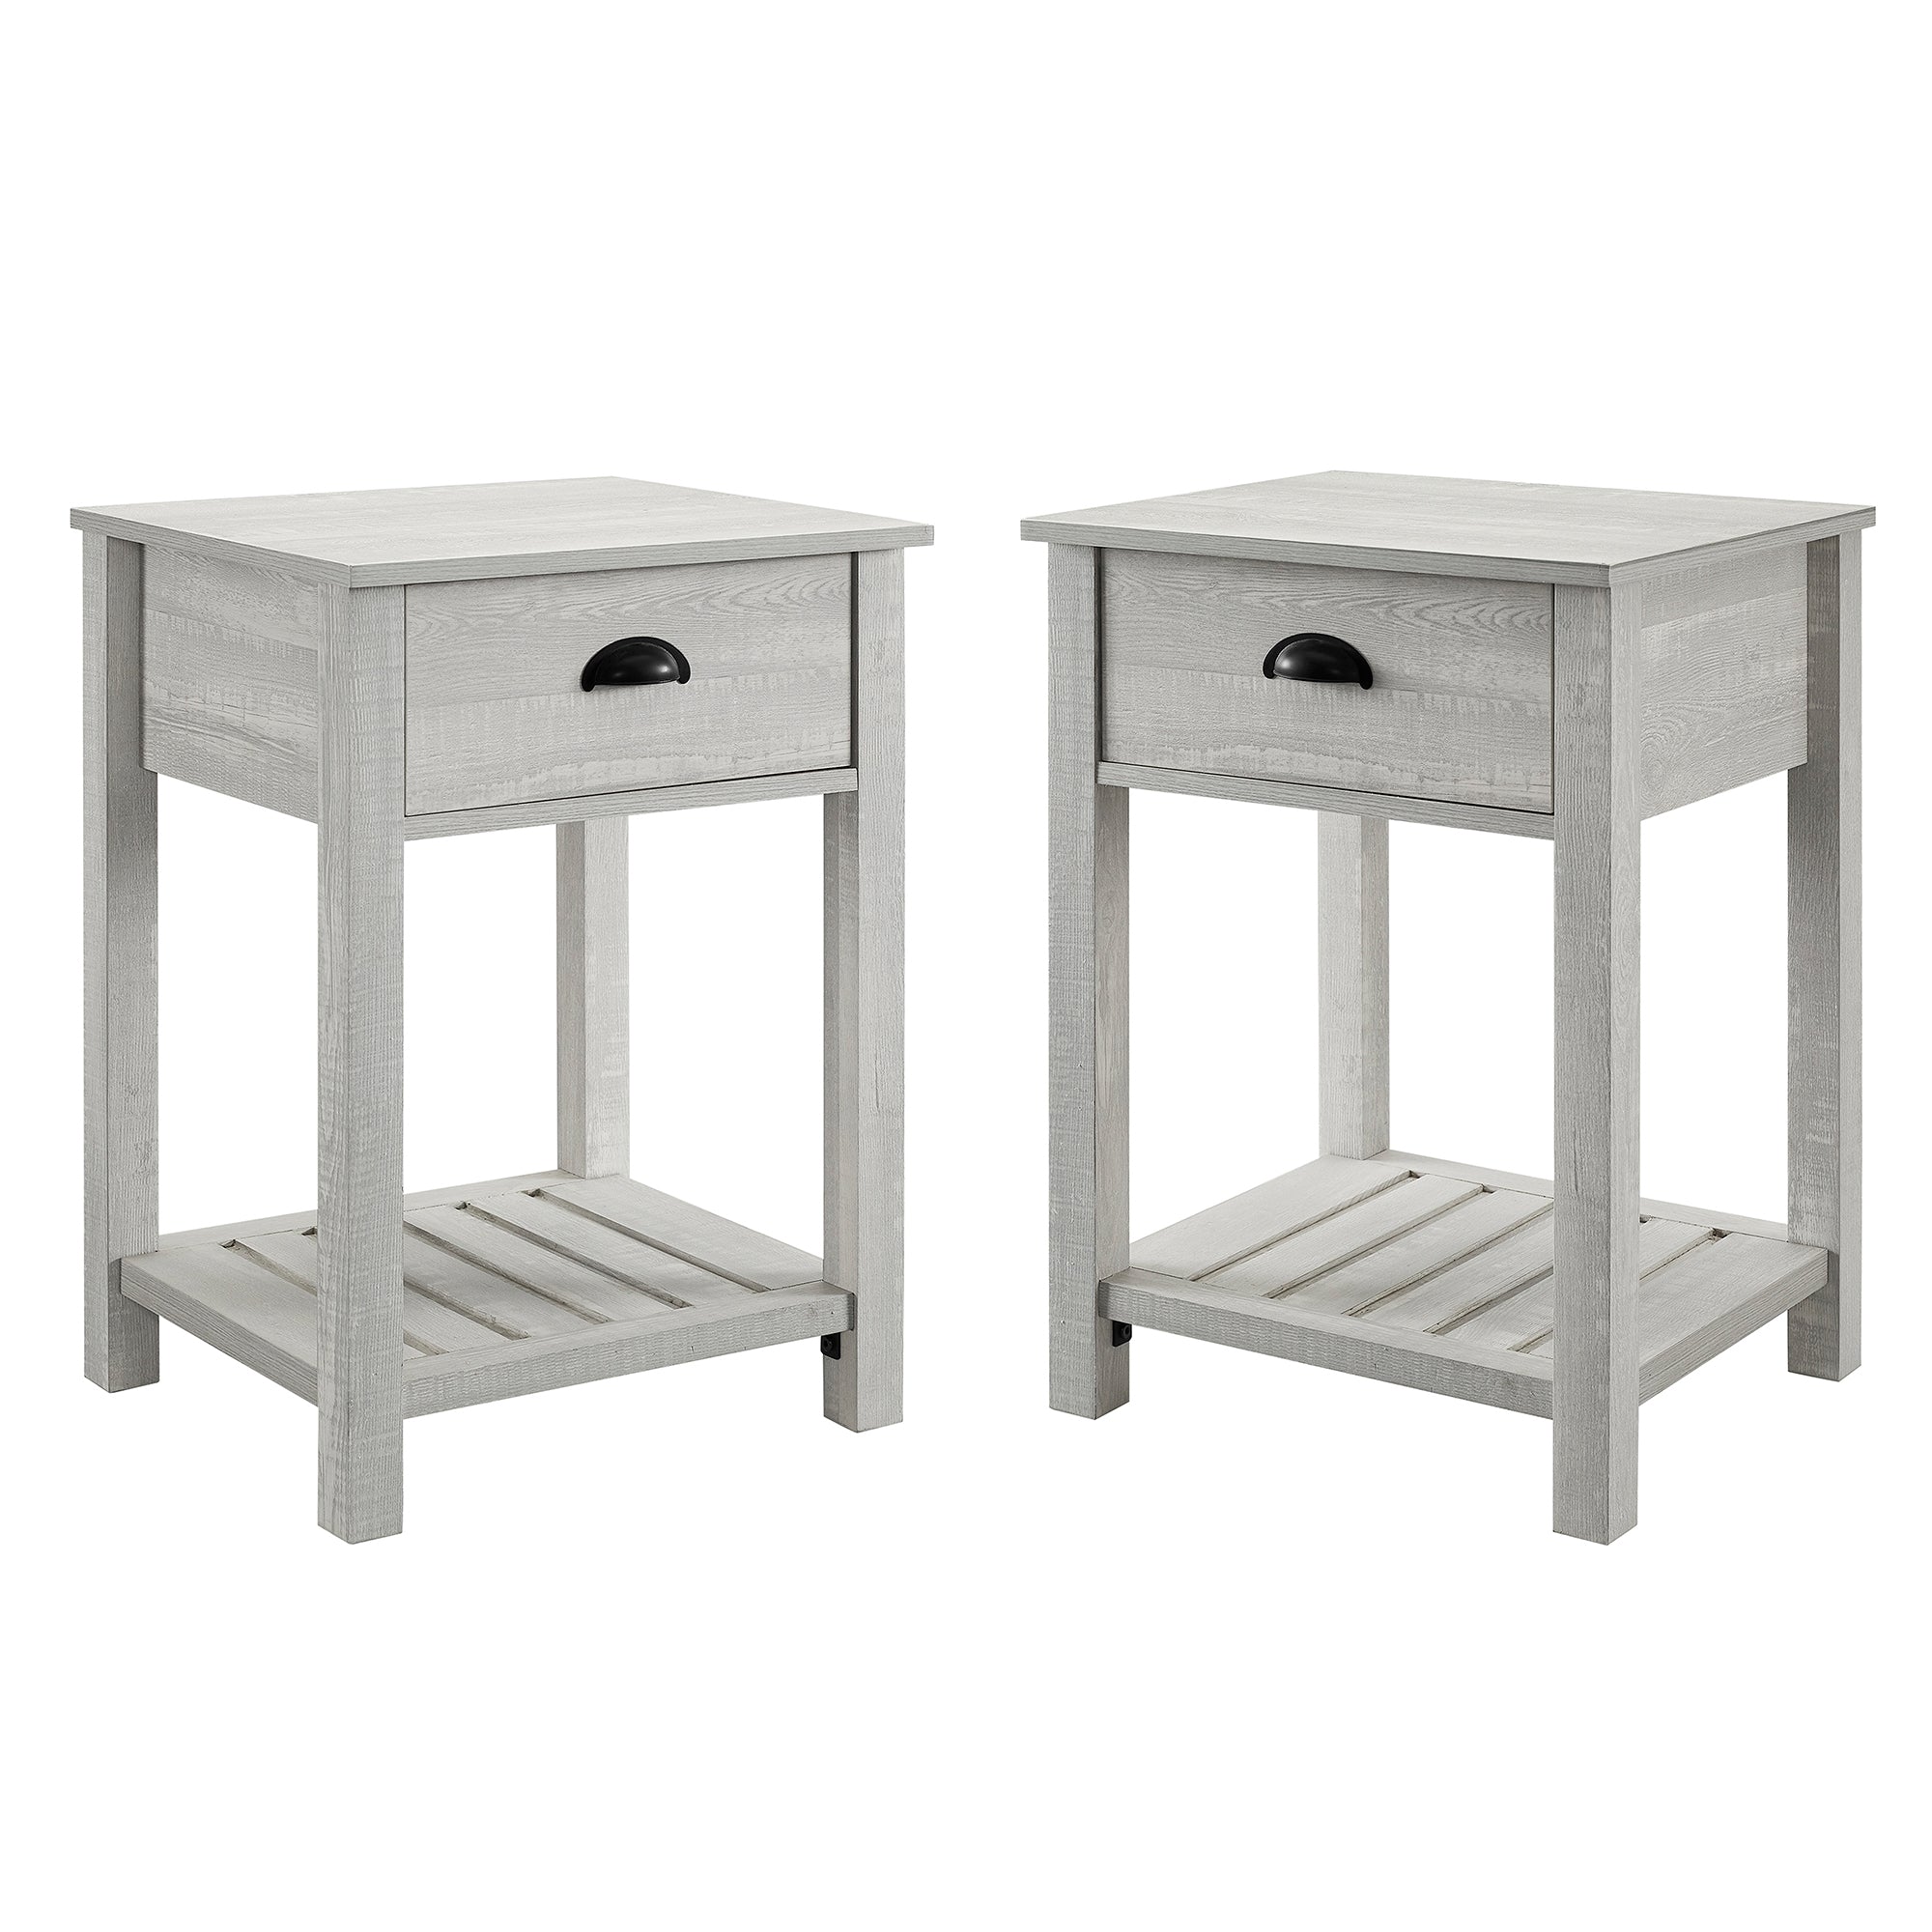 18" Country Farmhouse Single Drawer Side Table Set